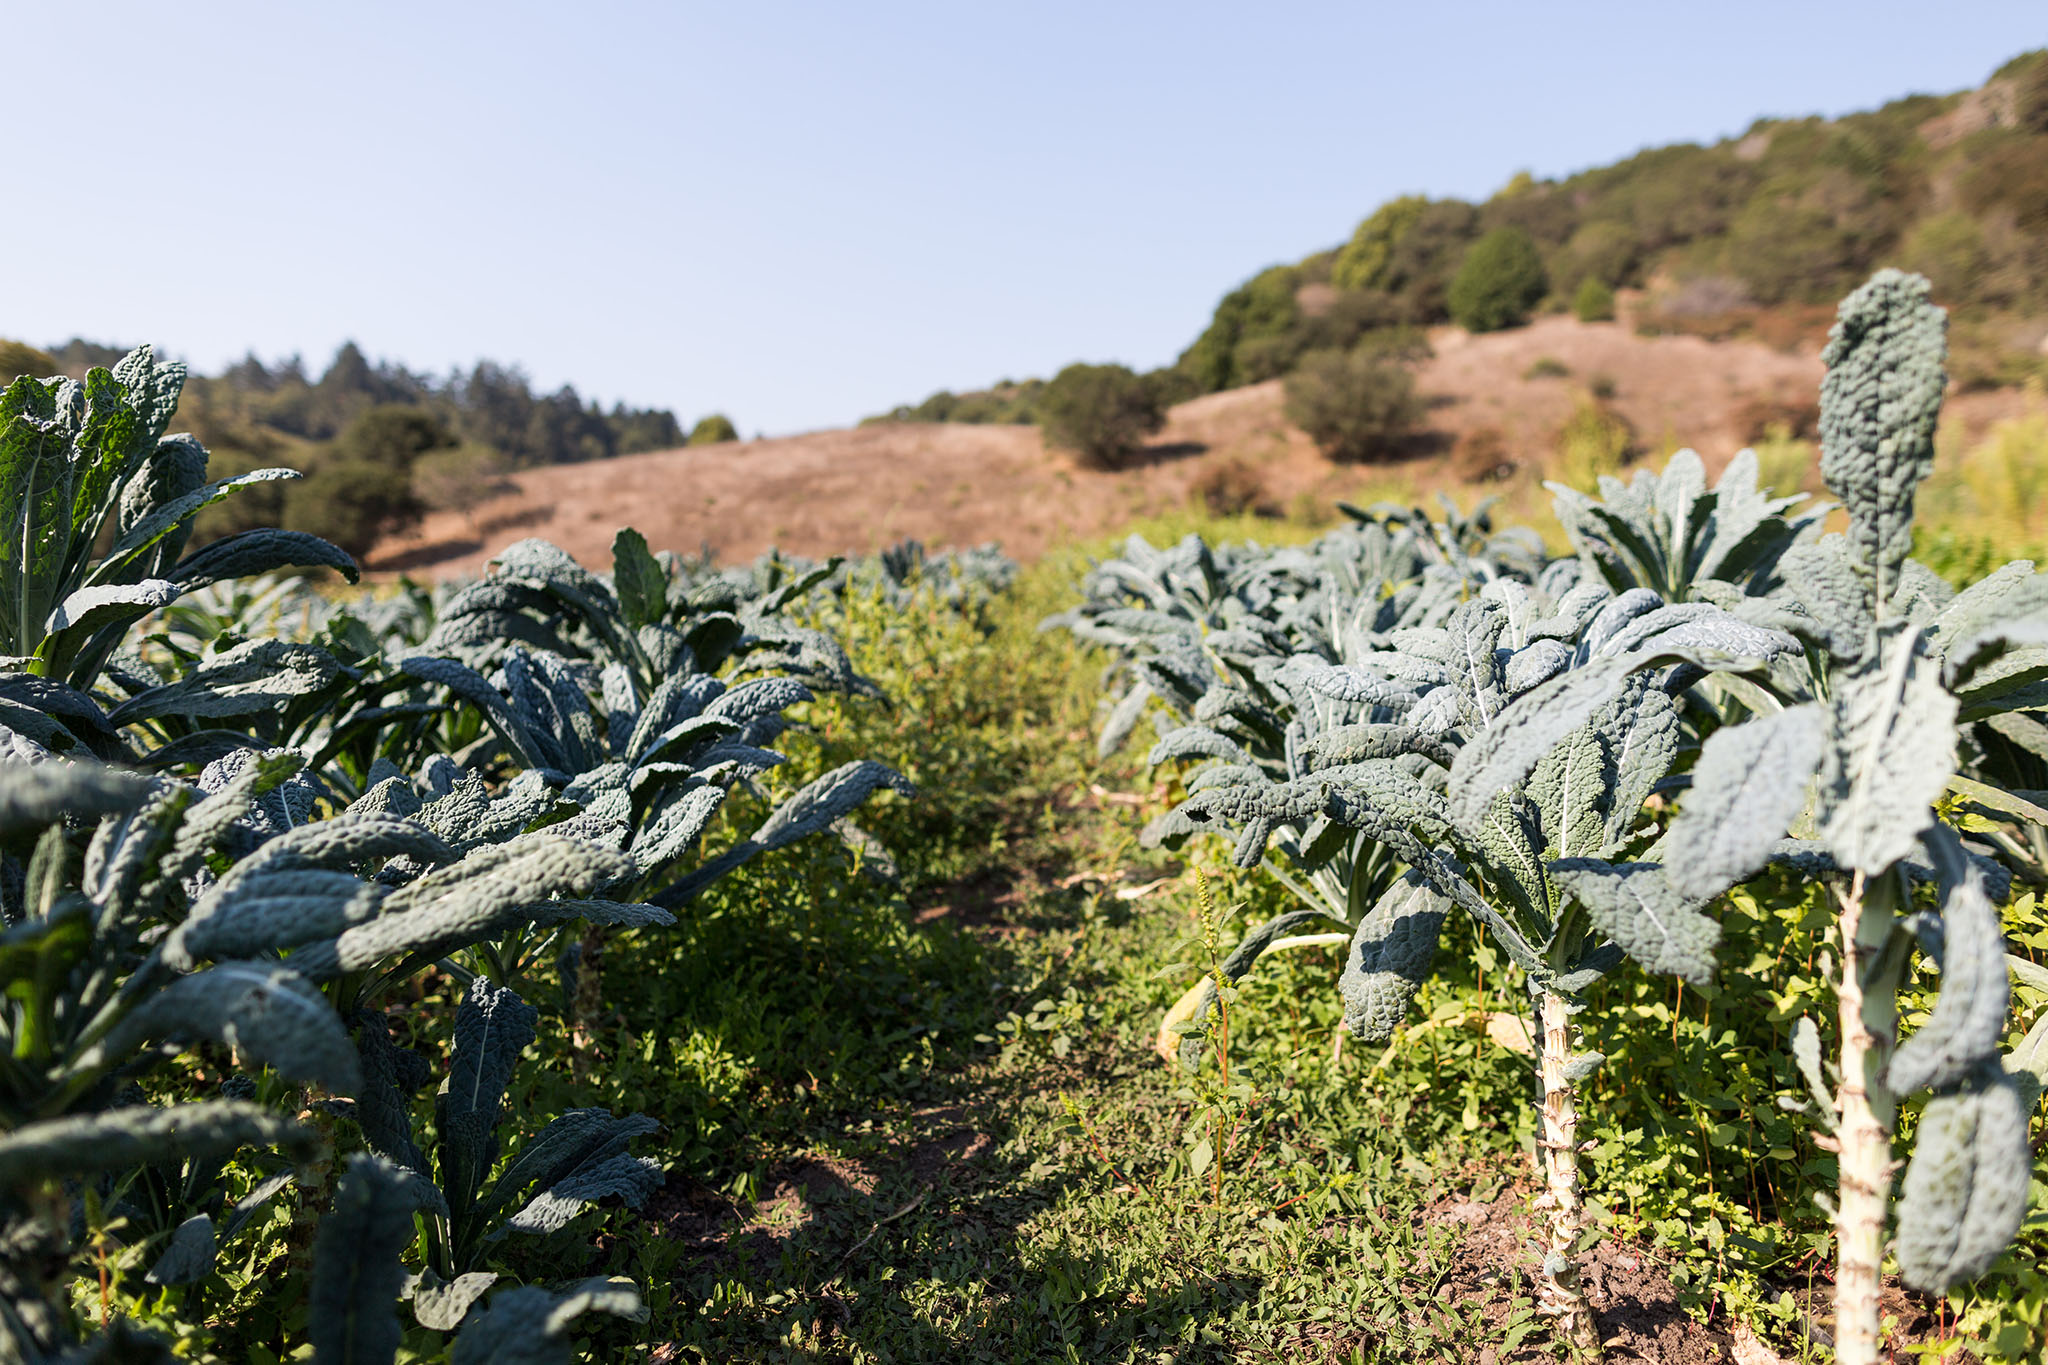 Rows of kale and leafy greens with hills rising in the background - MALT